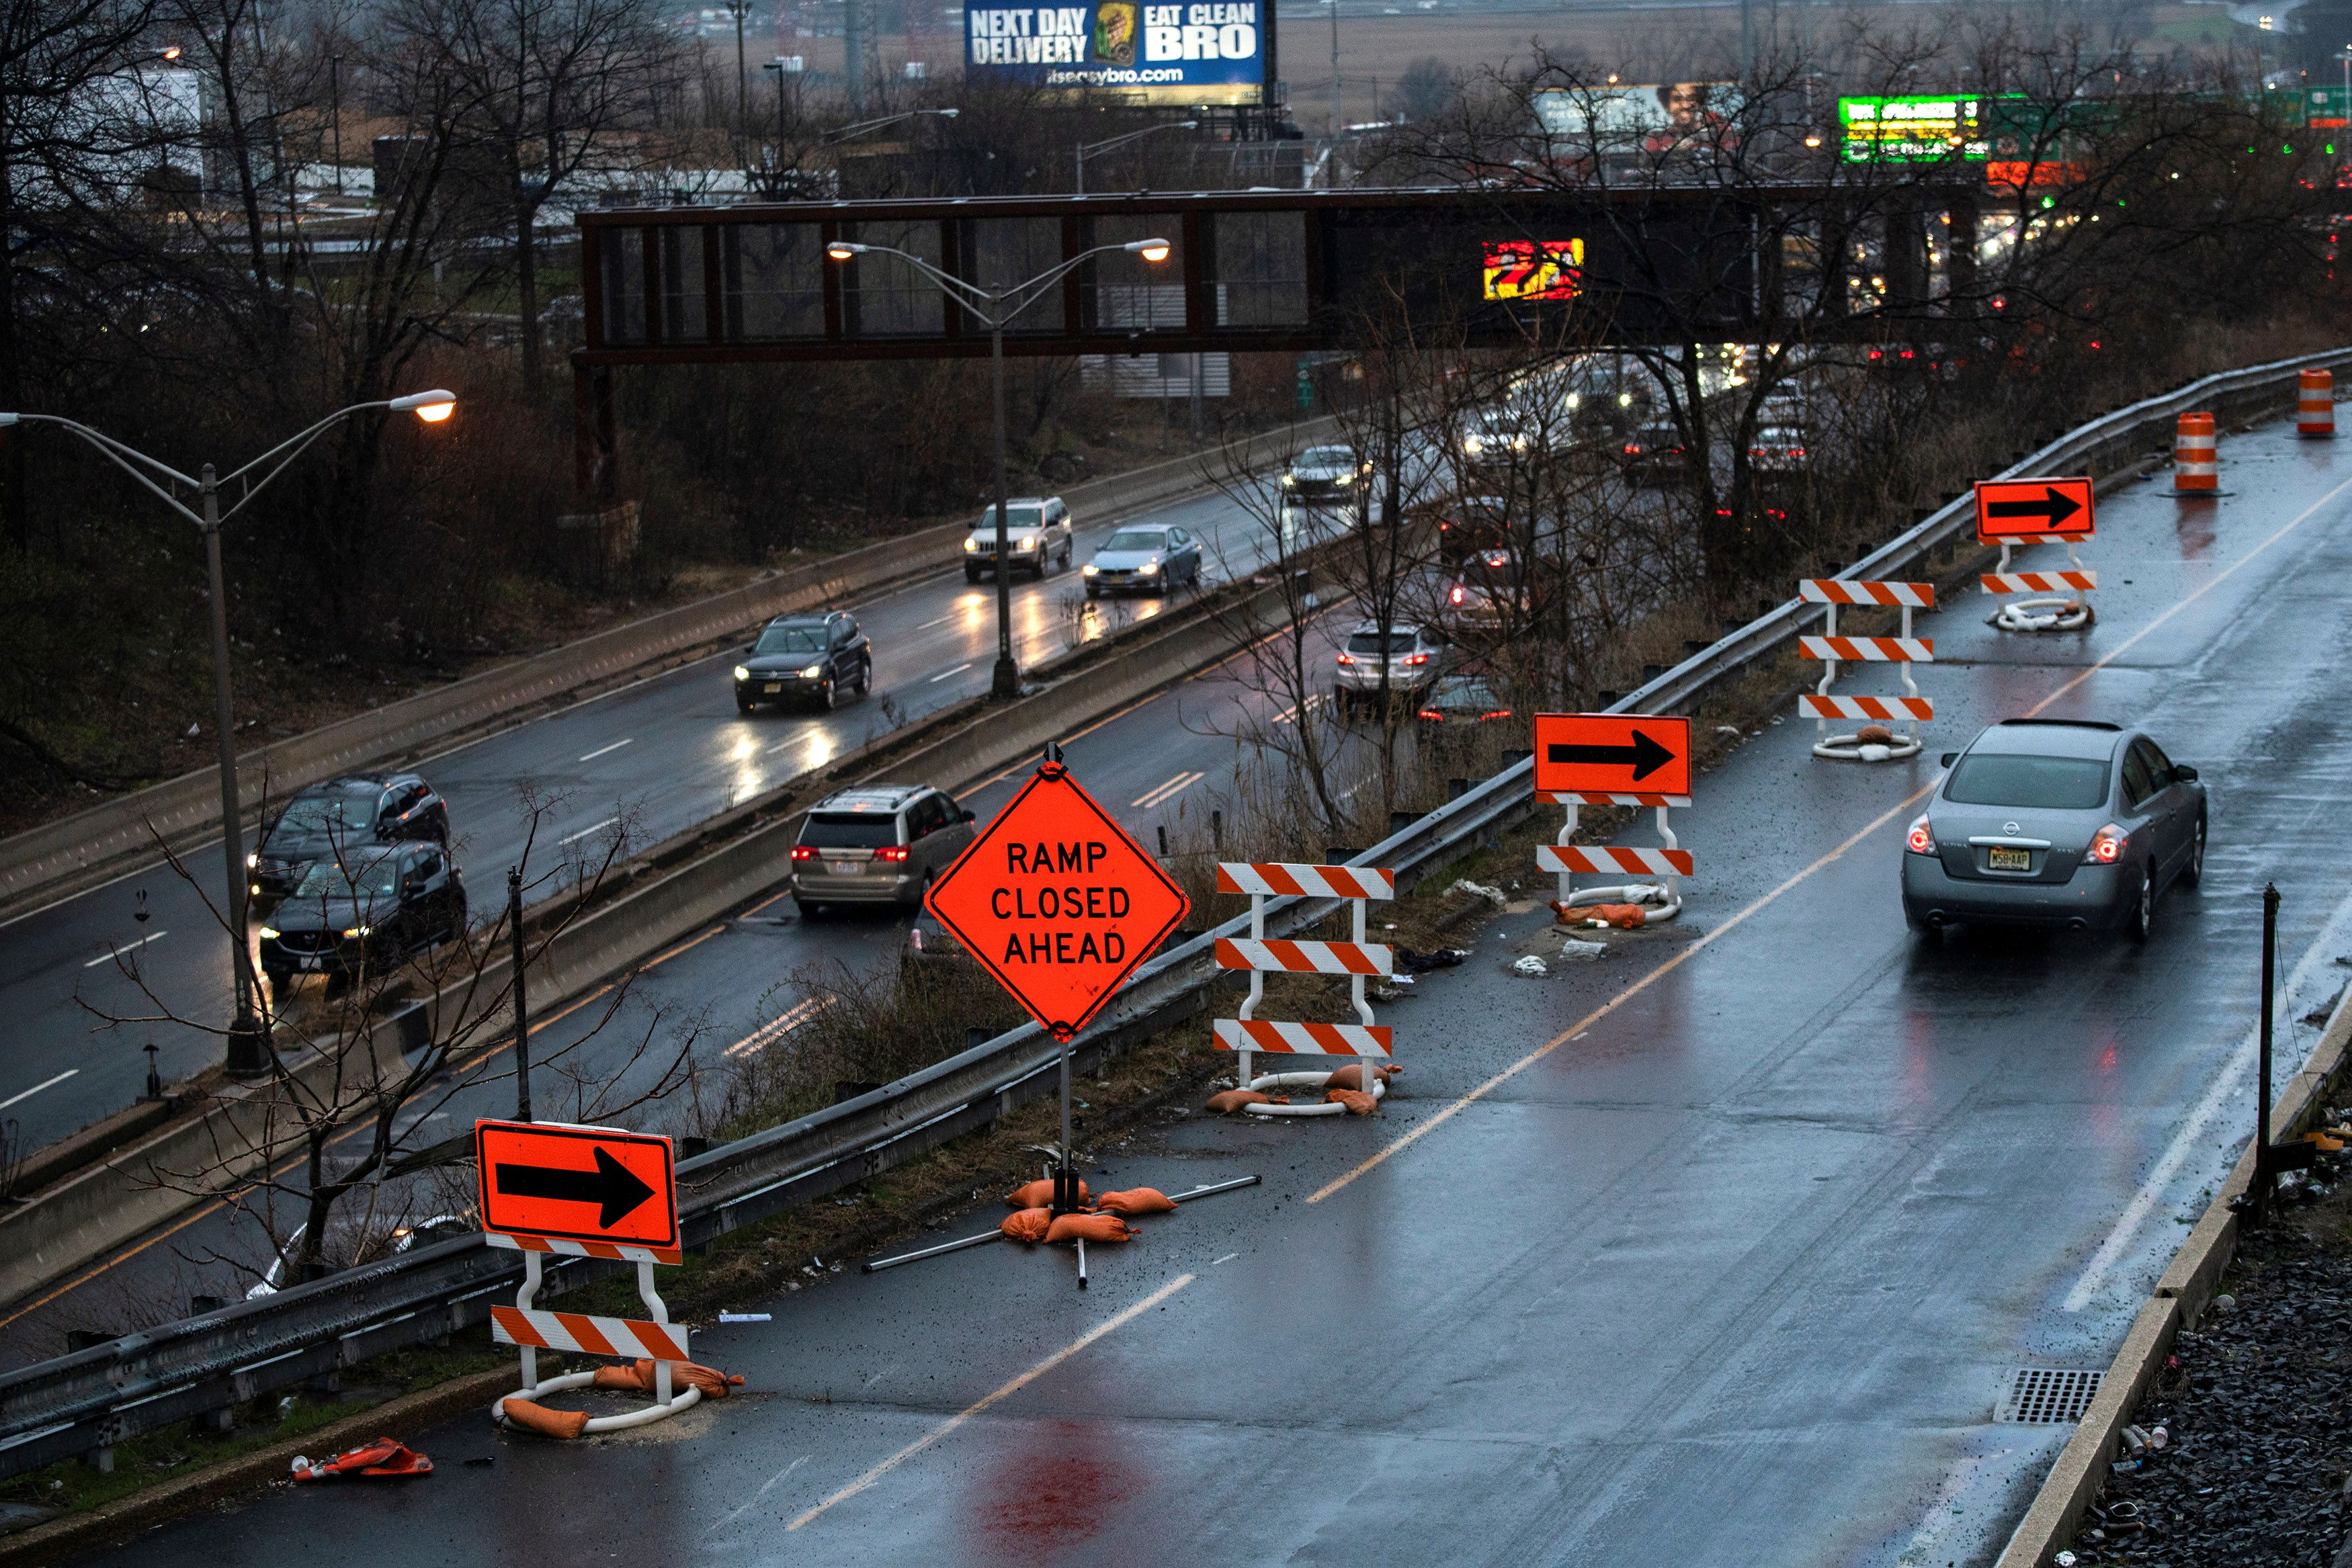 Cars drive along the NJ 495 route while road work signs are seen on the roadside, in Union City, New Jersey, U.S. March 31, 2021. REUTERS/Eduardo Munoz